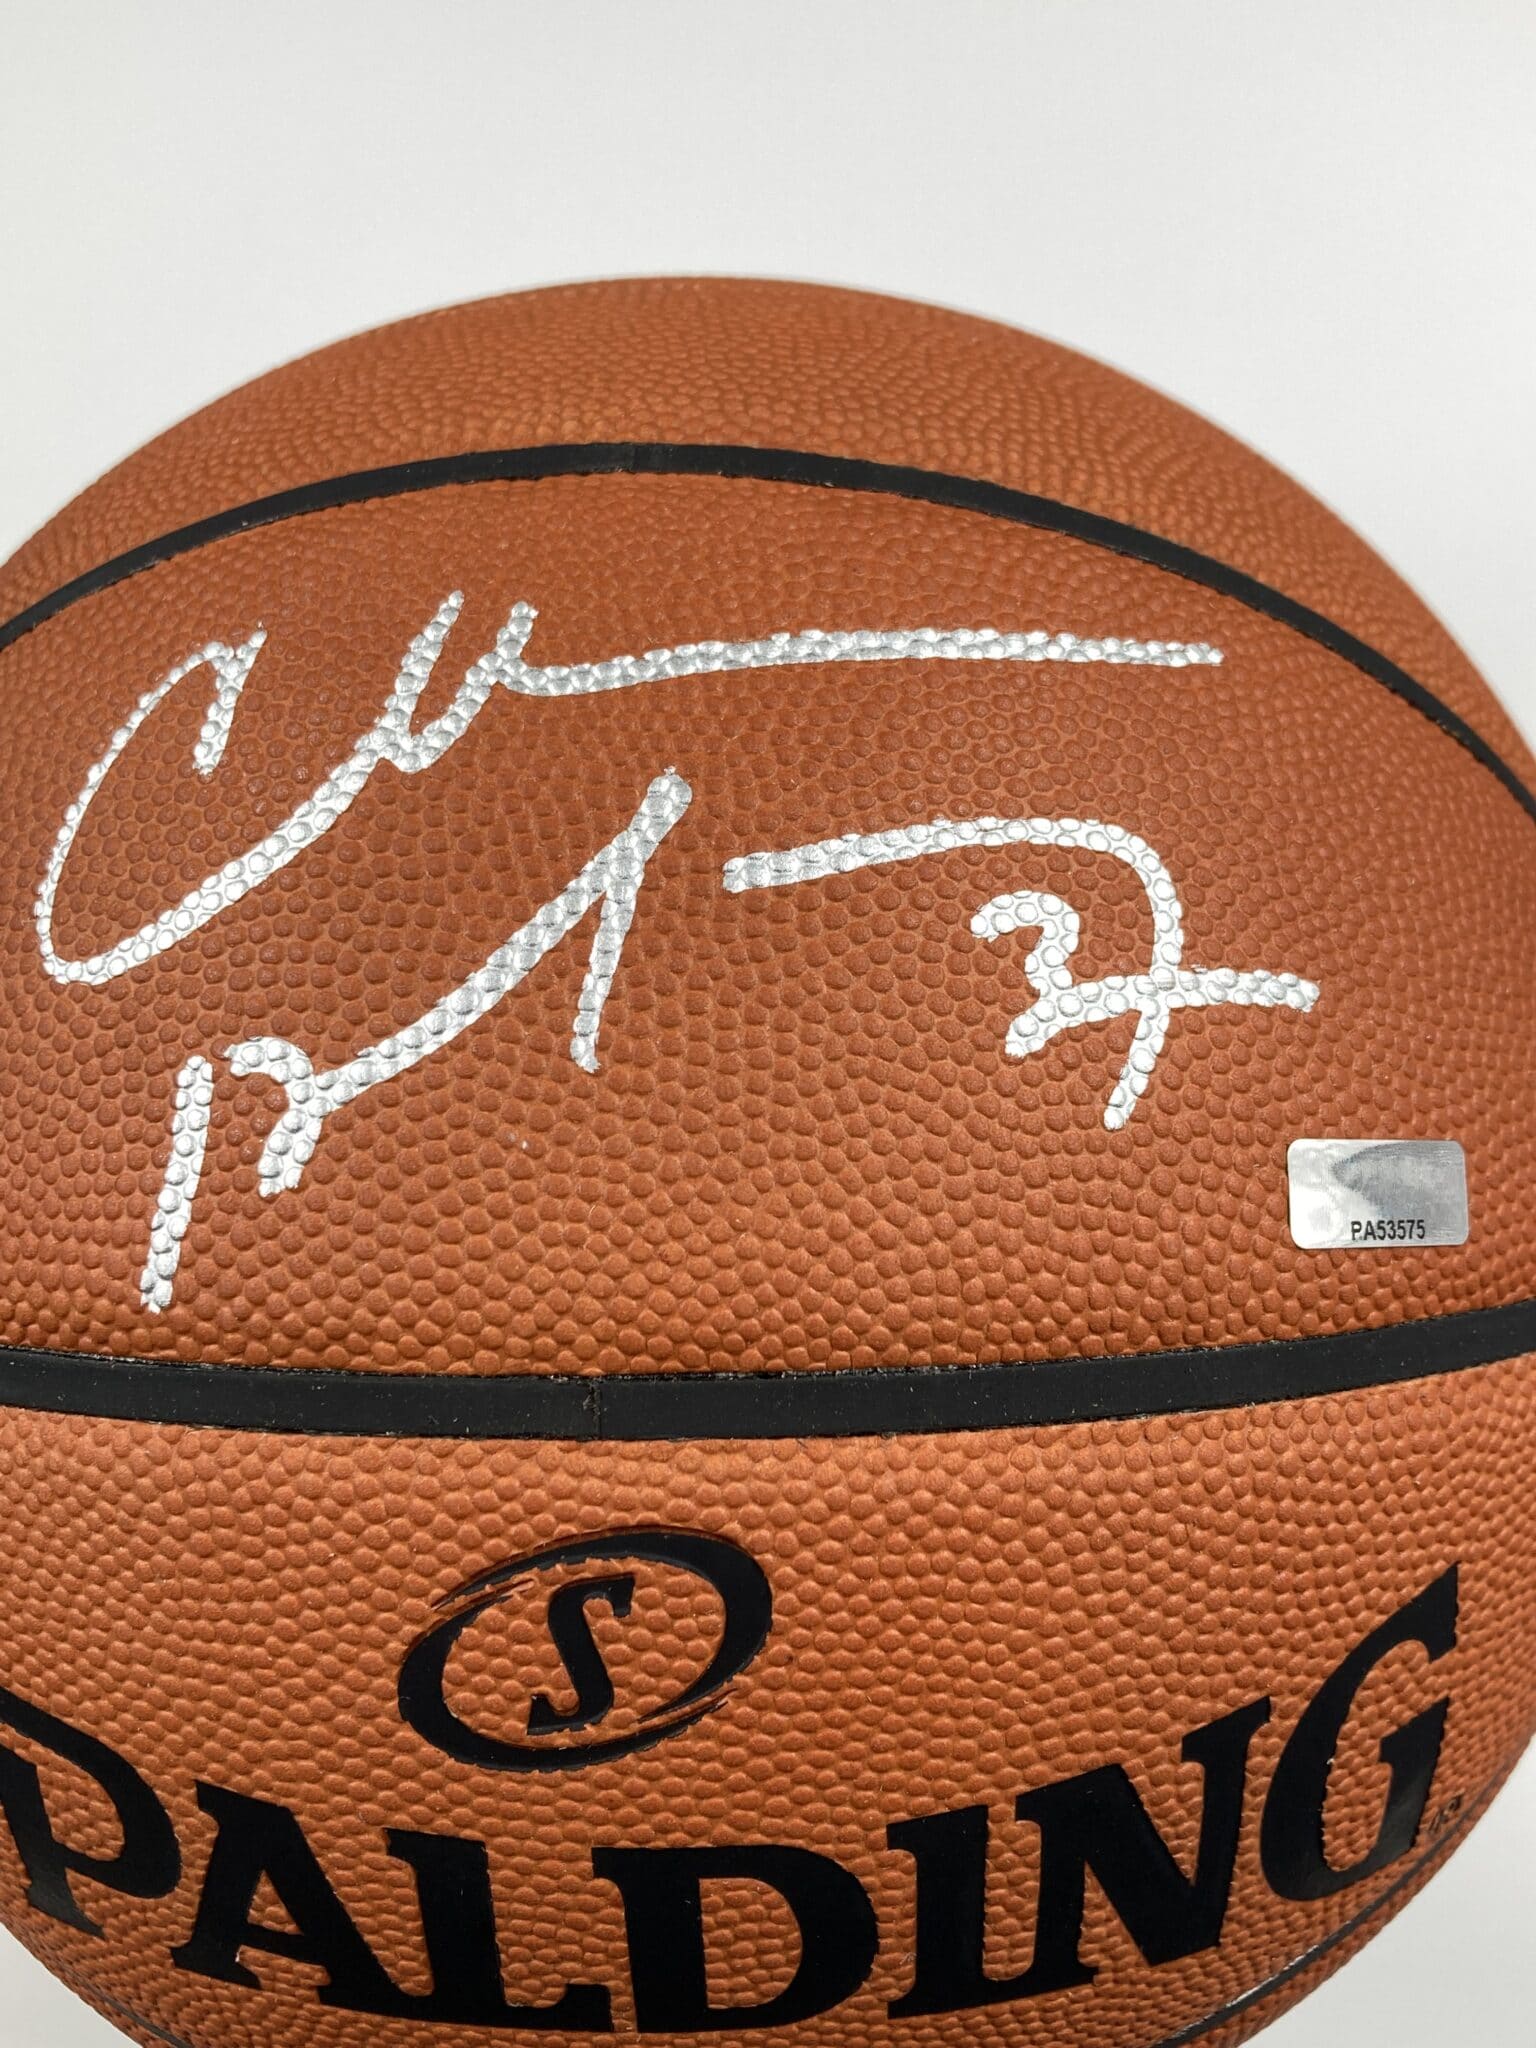 Sold at Auction: A. (1768) Charles, A Charles Barkley Signed